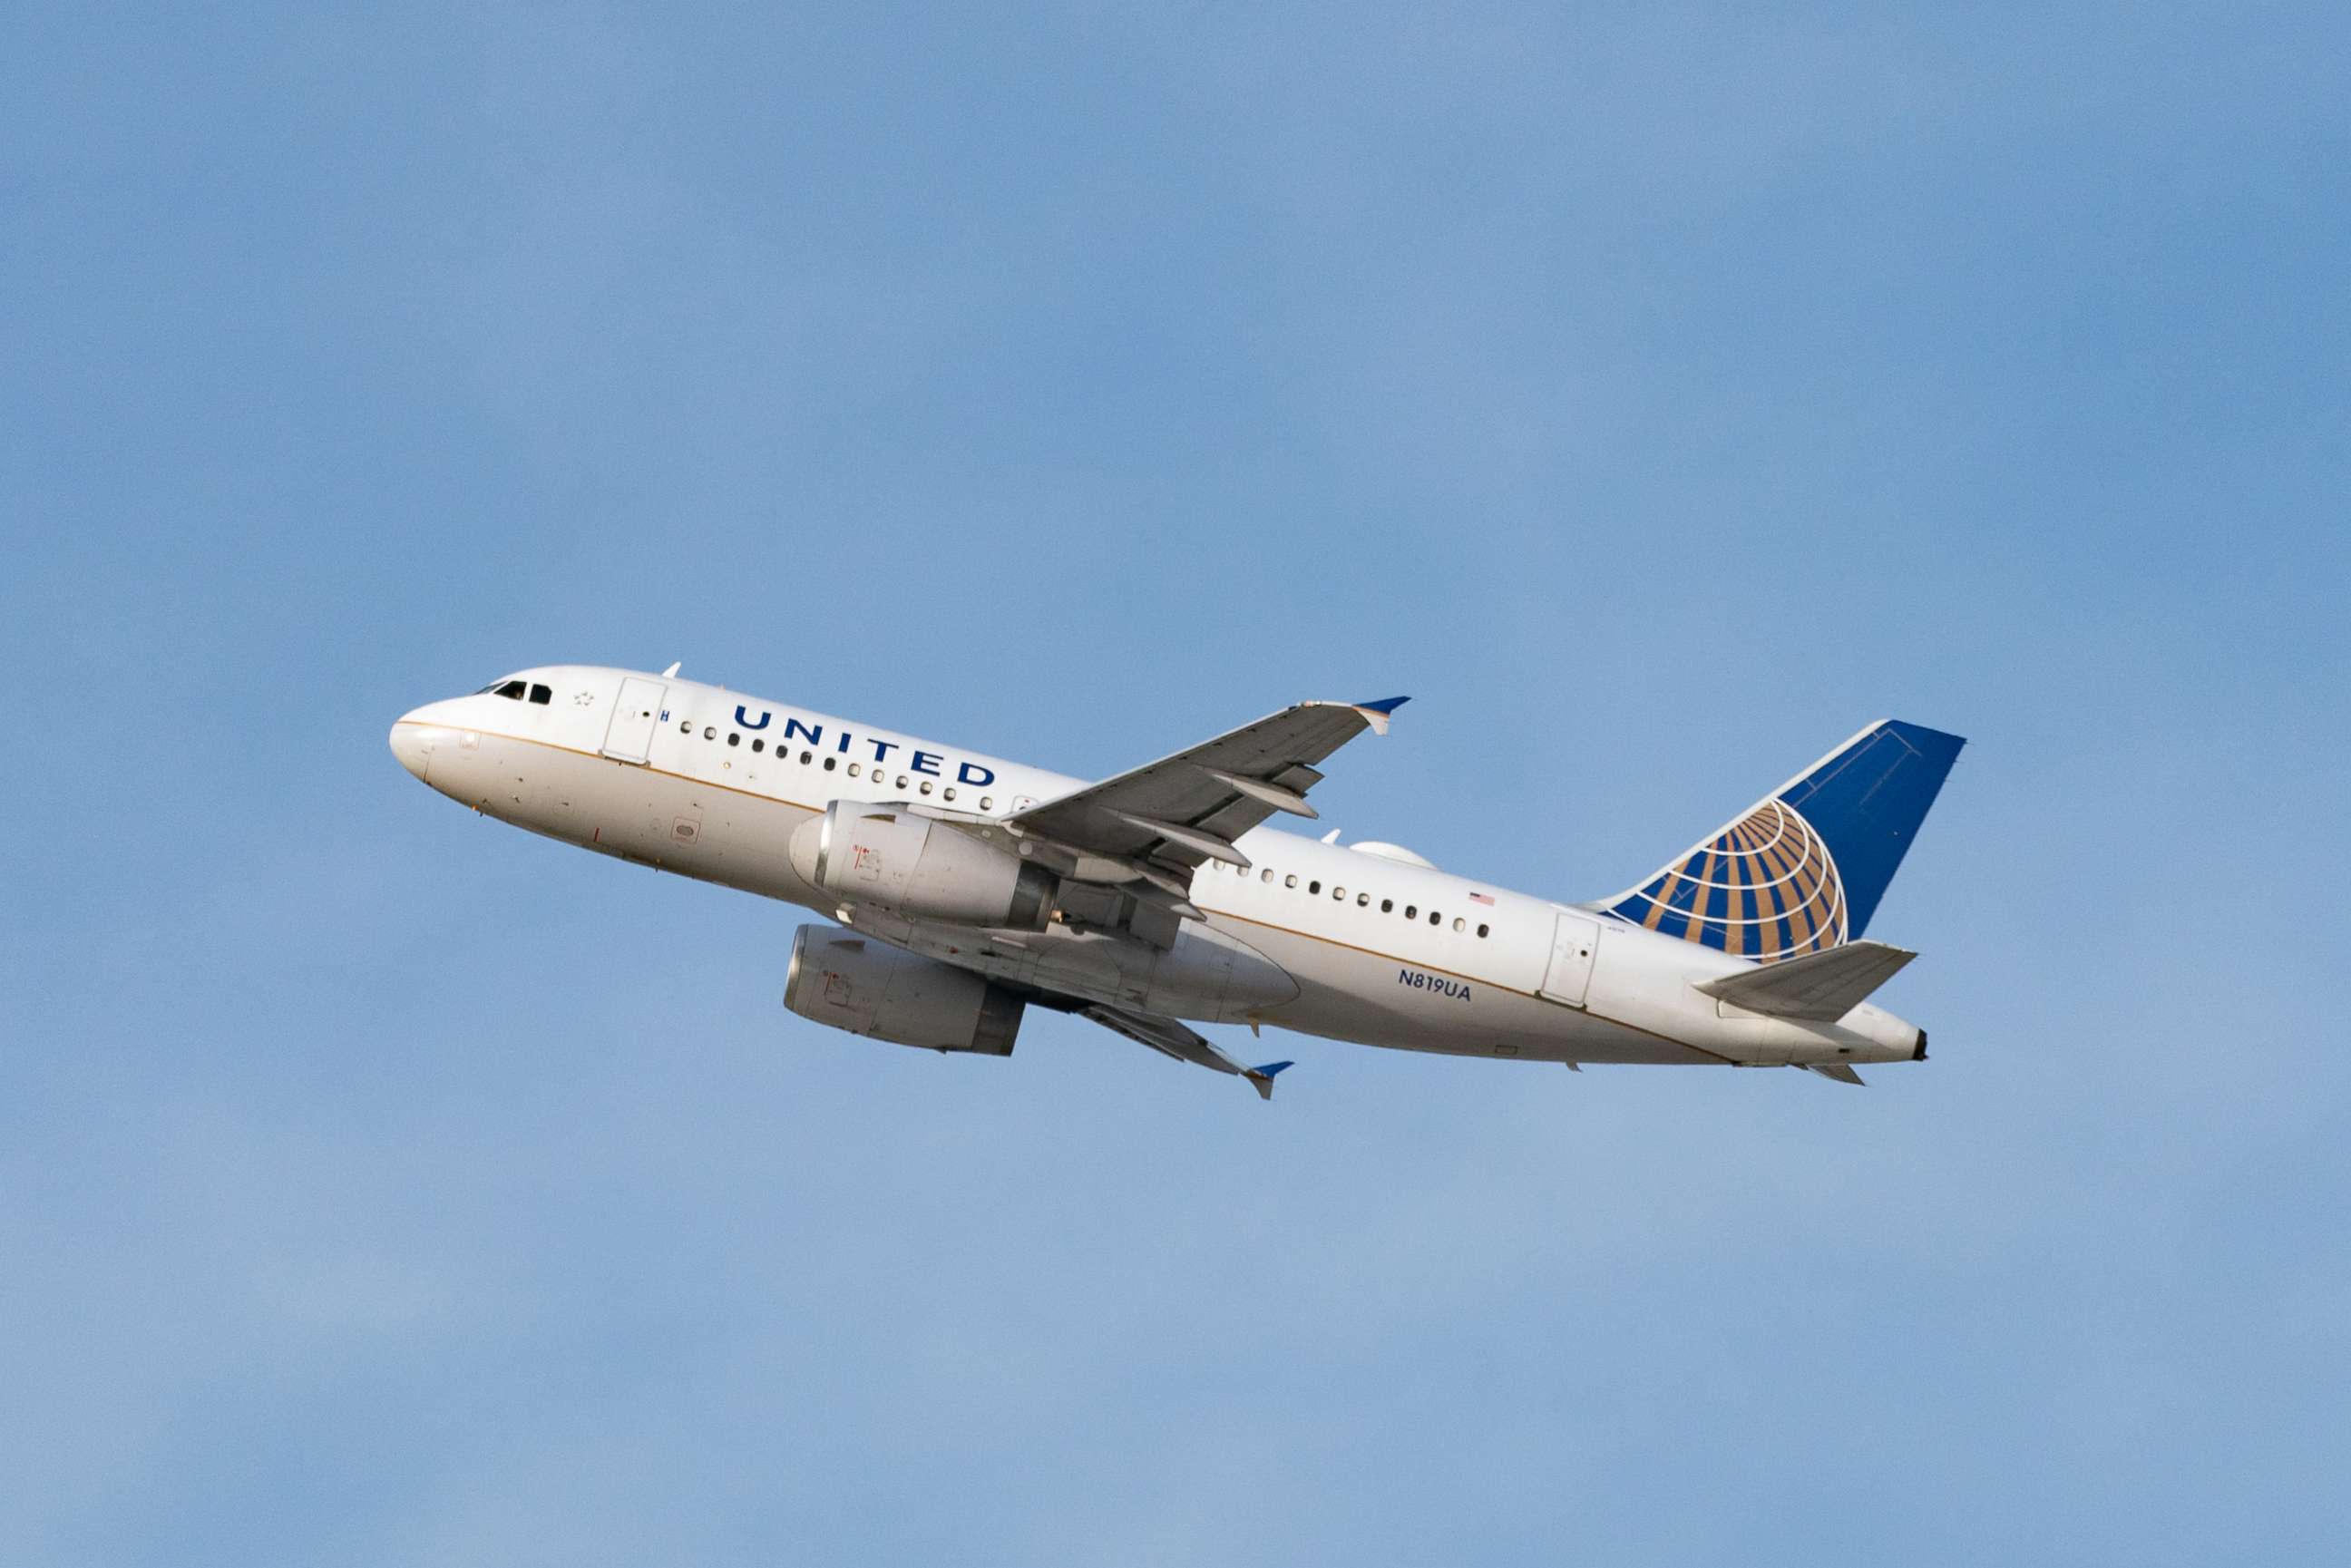 PHOTO: In this Jan. 13, 2021, file photo, United Airlines Airbus A319-131 takes off from Los Angeles international Airport.